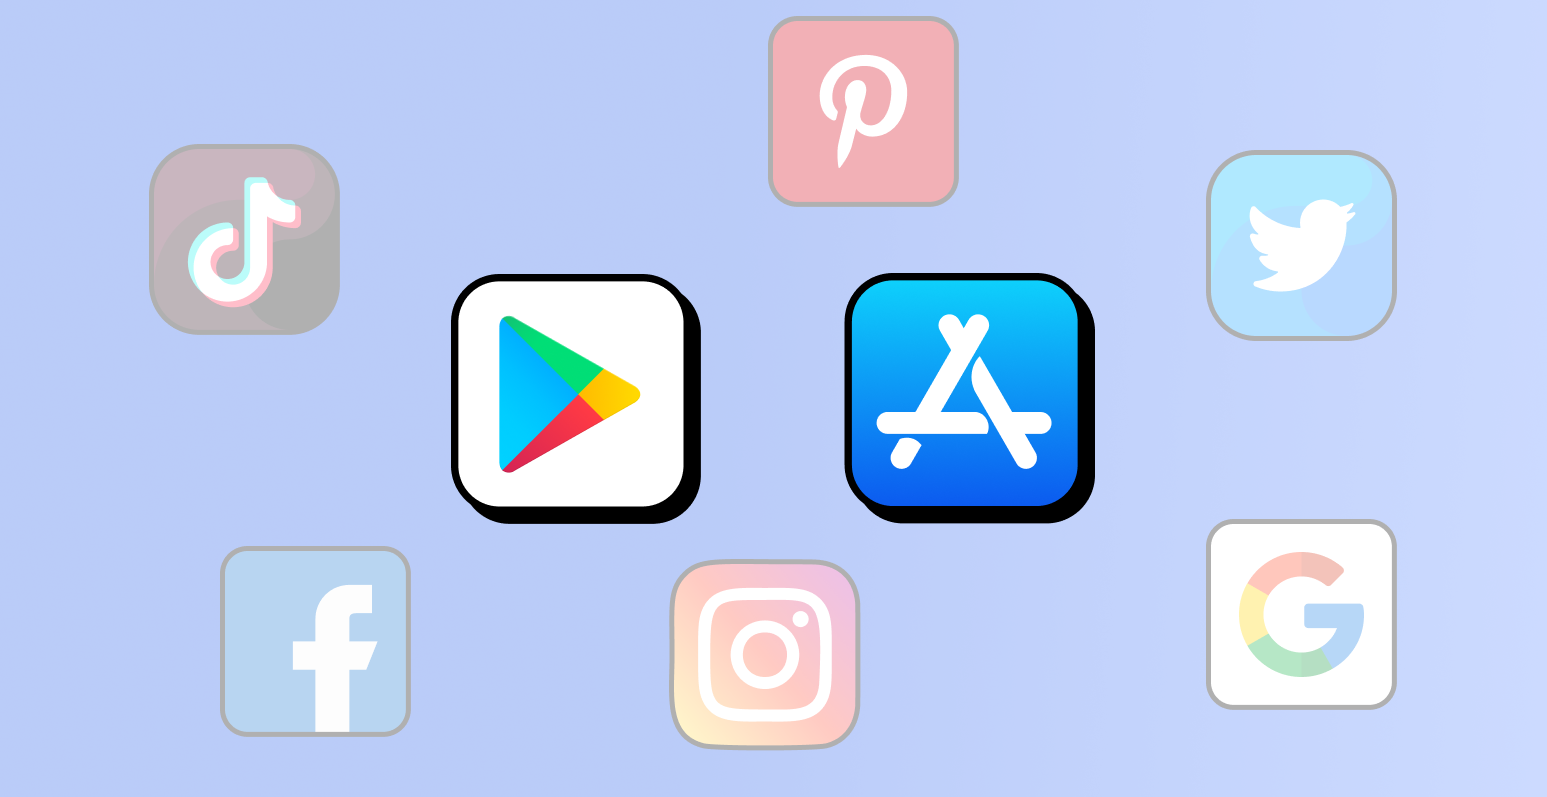 The image displays various popular mobile apps, such as Facebook and Pinterest, positioned randomly around the image. In the center, larger compared to the others, are the logos for the App Store and Google Play Store. This image intends to demonstrate that by turning your Shopify store into a mobile app your brand will be in the company of some of the world's largest and most popular brands, and you can benefit from increased visibility and credibility